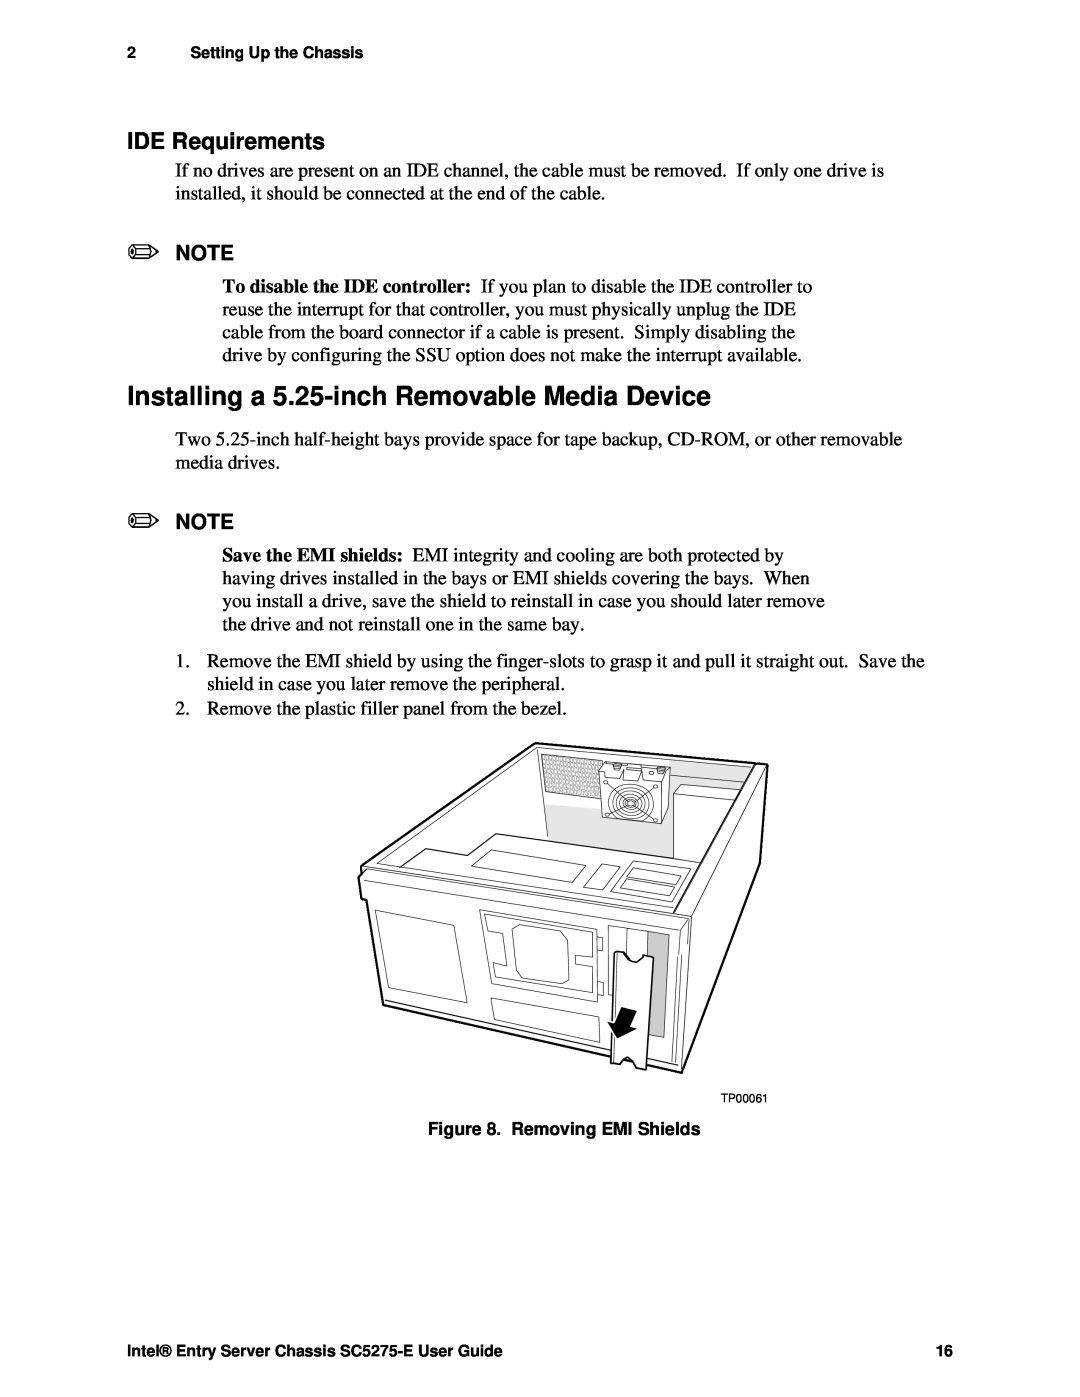 Intel SC5275-E, C50277-001 manual Installing a 5.25-inch Removable Media Device, IDE Requirements 